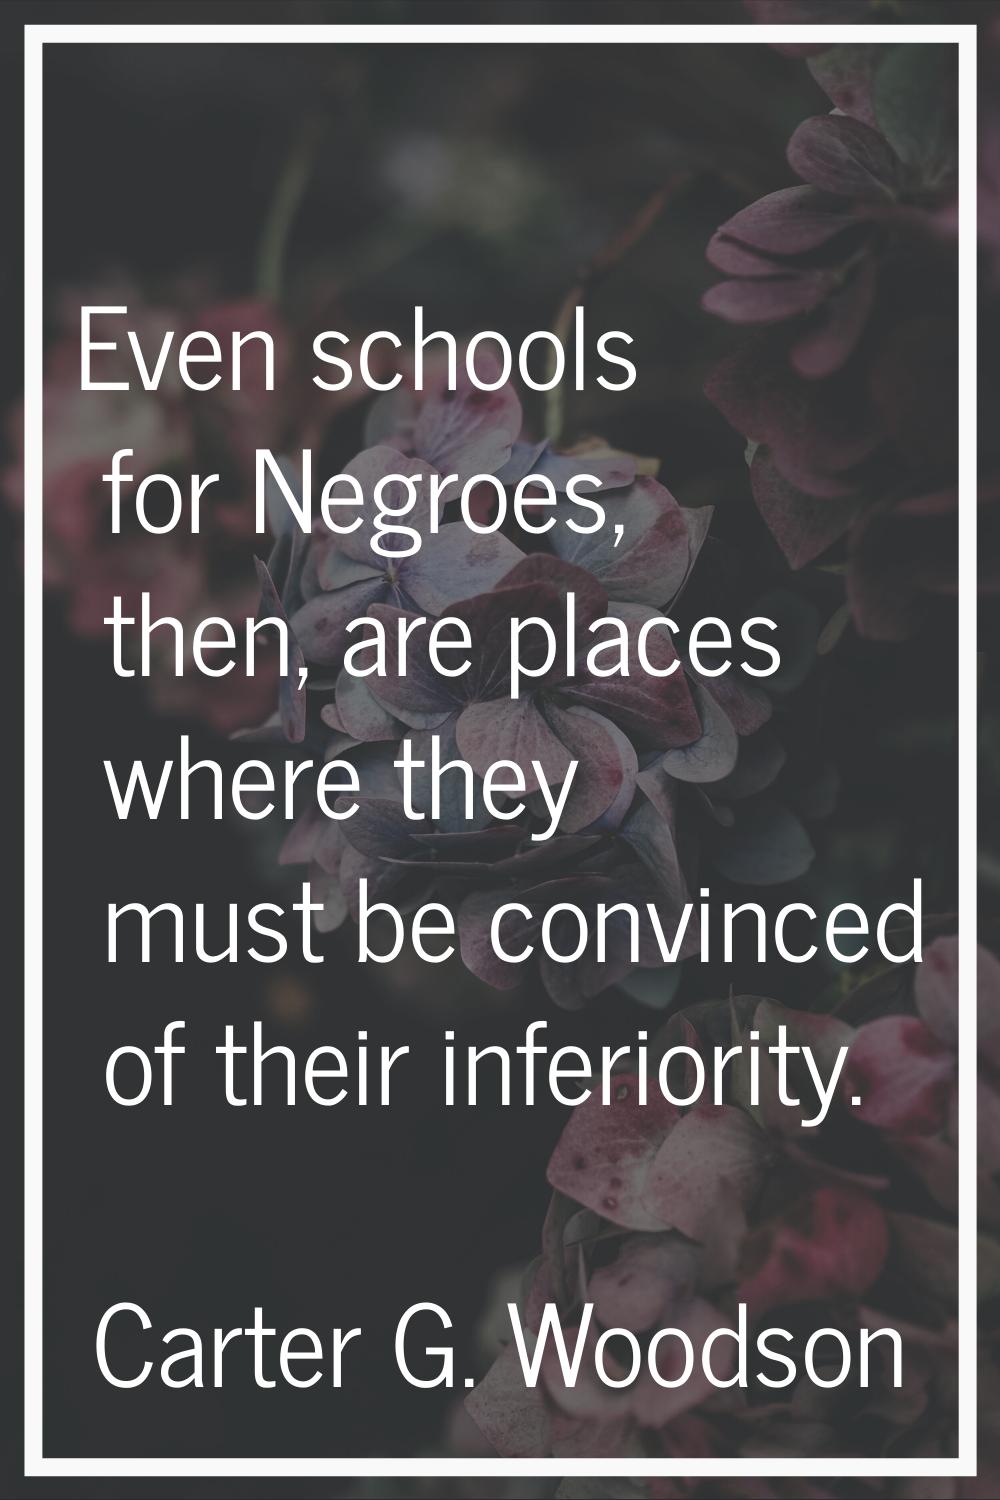 Even schools for Negroes, then, are places where they must be convinced of their inferiority.